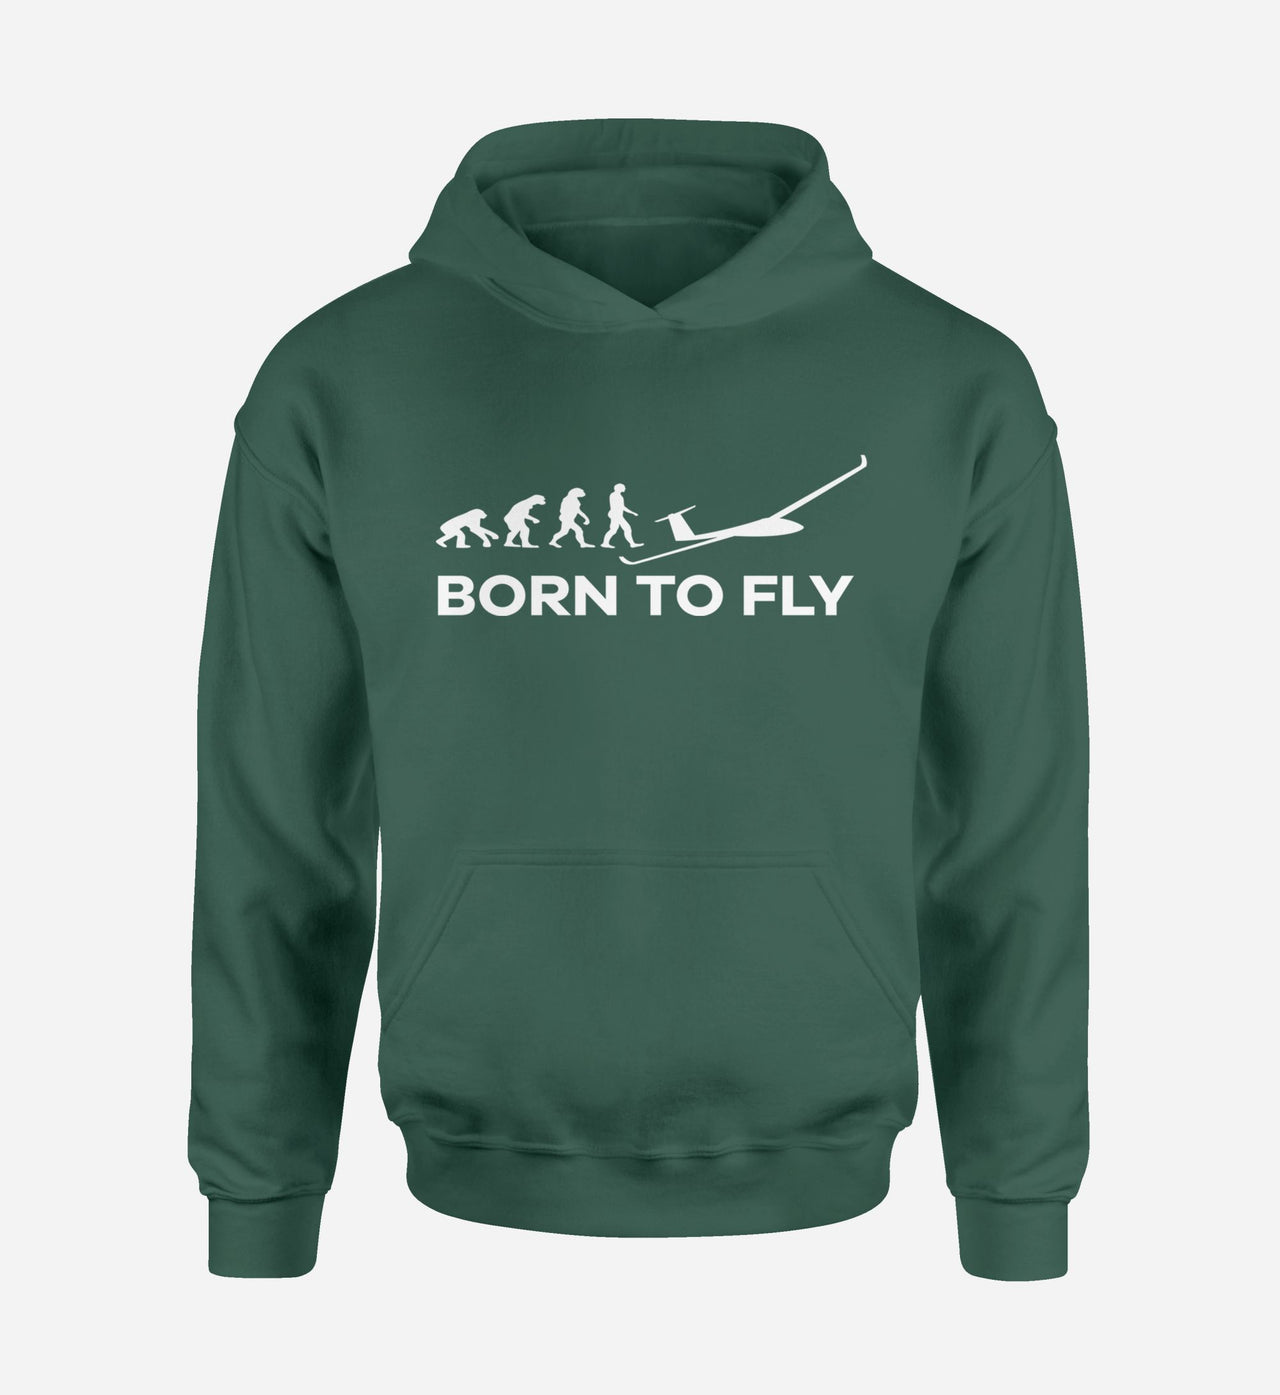 Born To Fly Glider Designed Hoodies